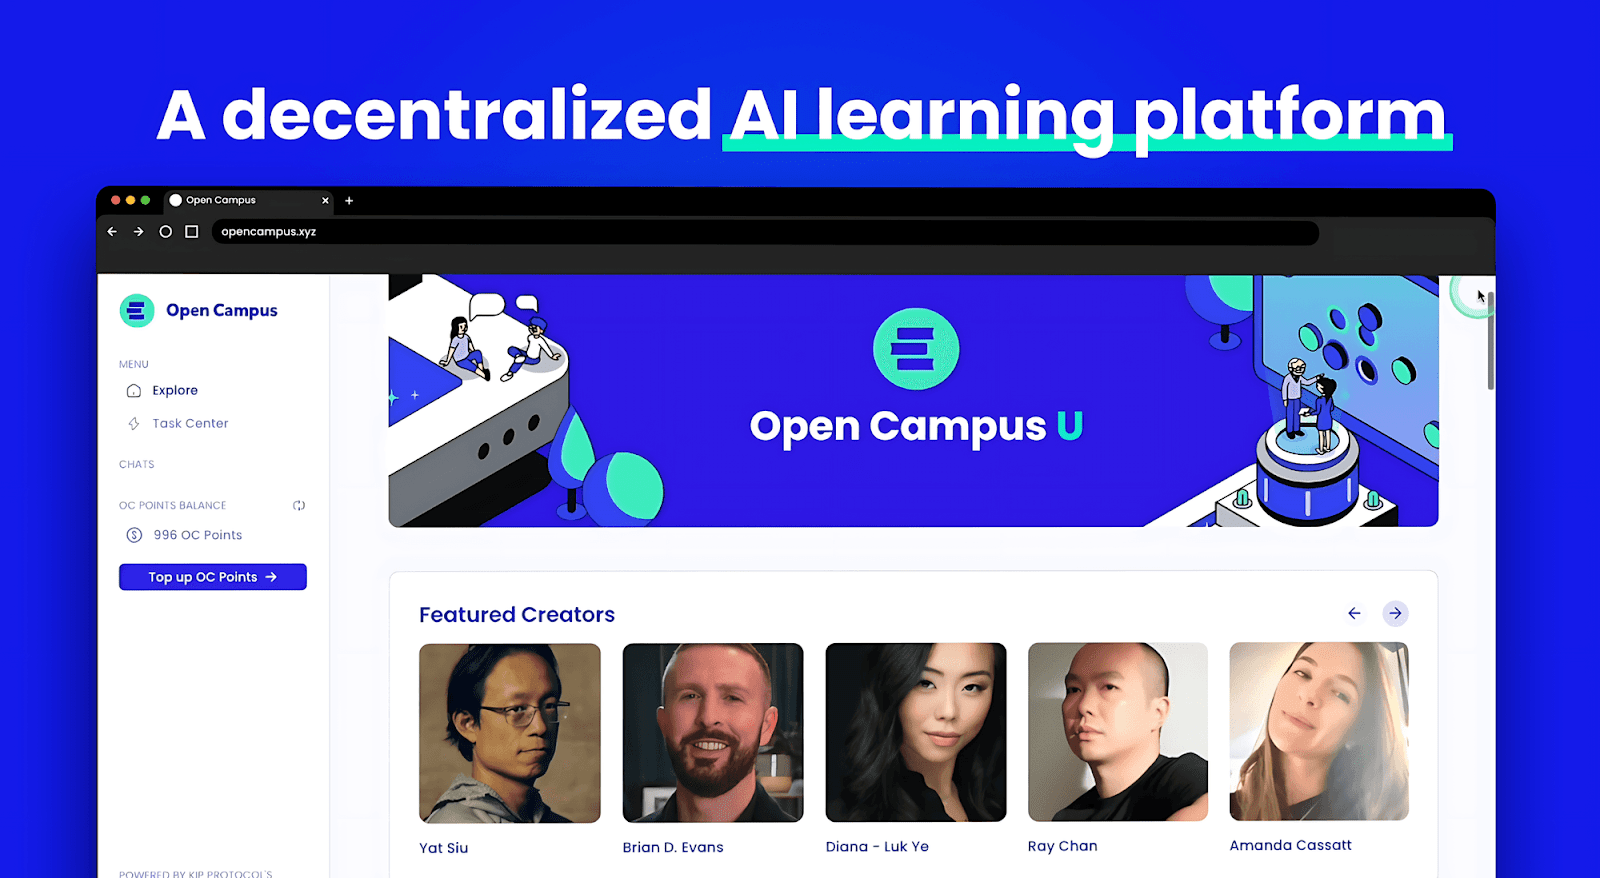 , KIP Protocol Partners with Open Campus to Launch Open Campus U, Transforming Education Through Decentralized AI